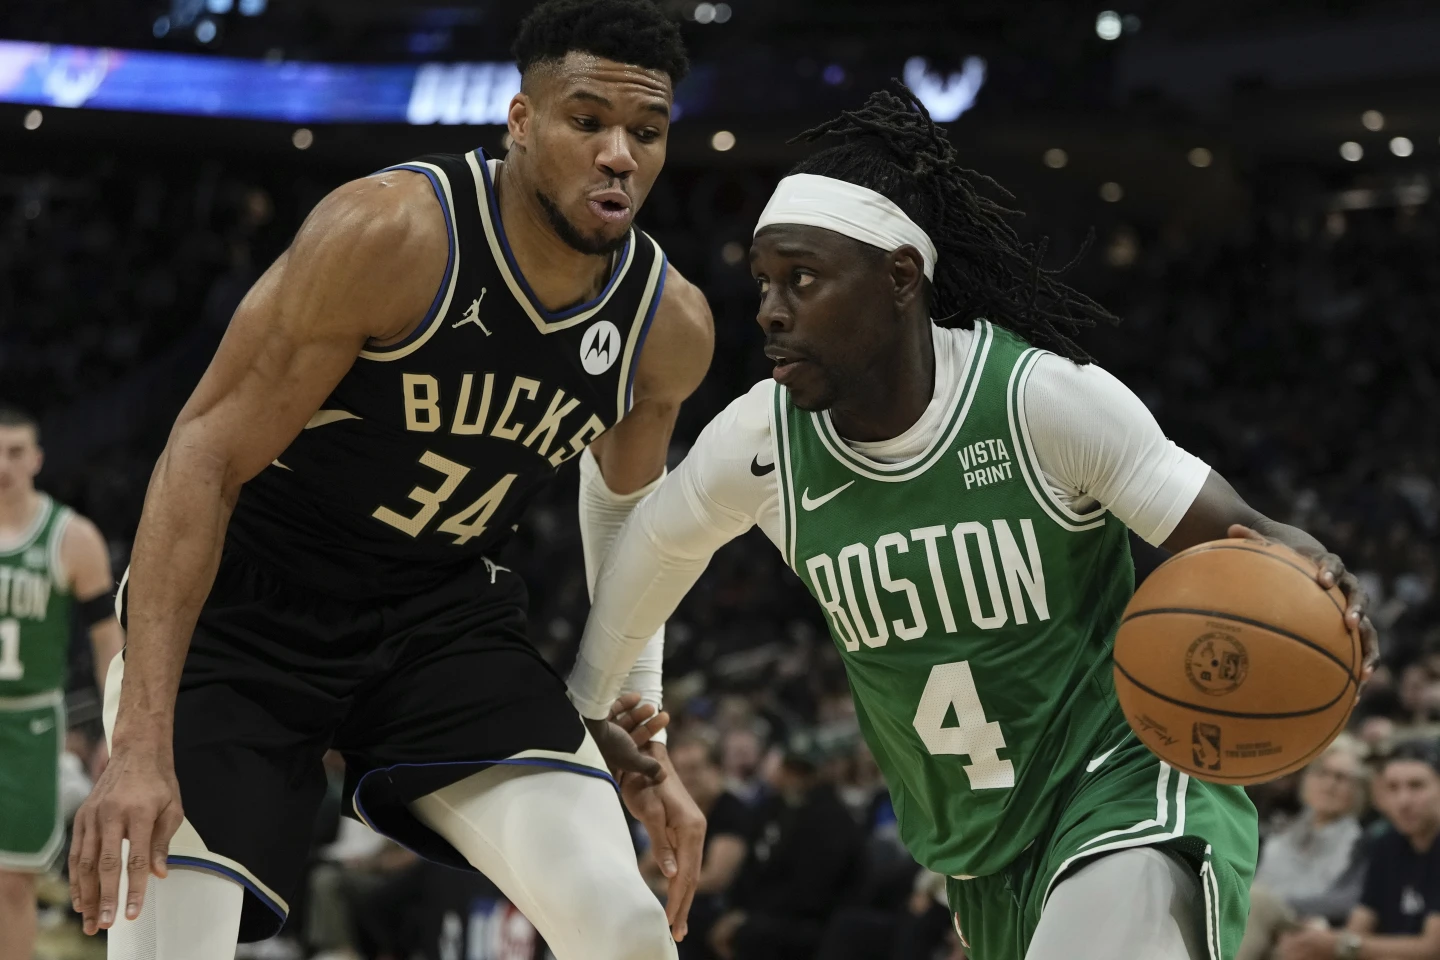 Bucks withstand Antetokounmpo’s injury to beat Celtics, as teams combined for record-low 2 FTs